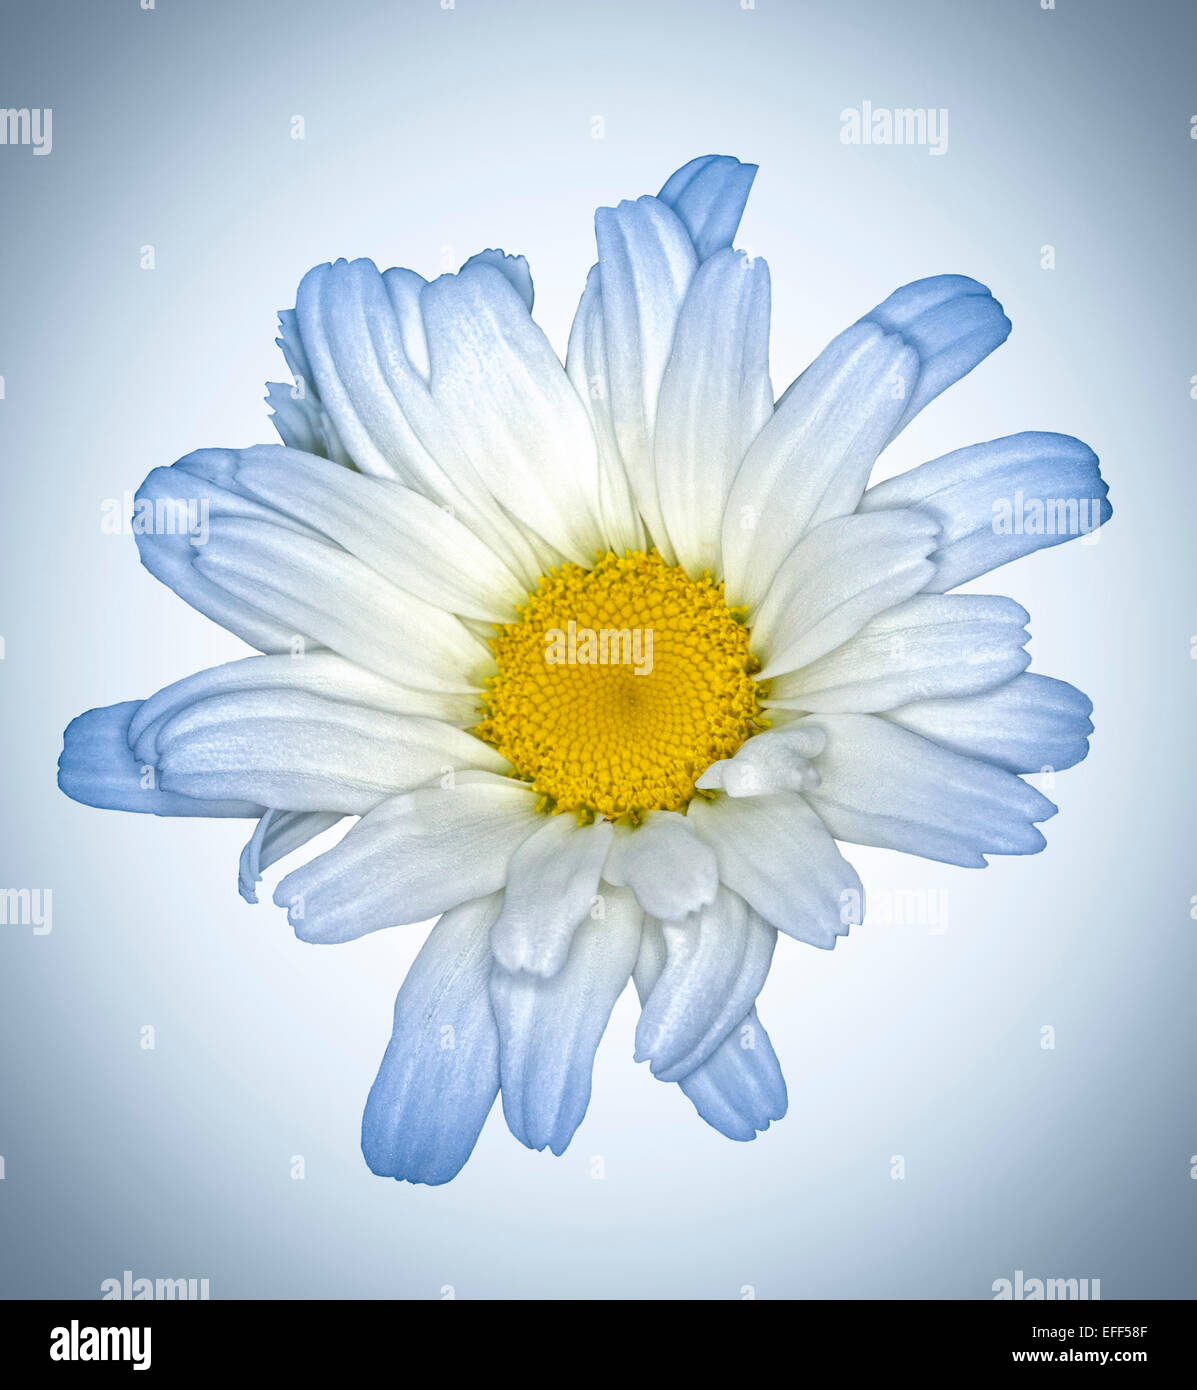 White flower of Leucanthemum 'Daisy May' - Shasta Daisy, with light blue tips to petals, against pale blue background Stock Photo